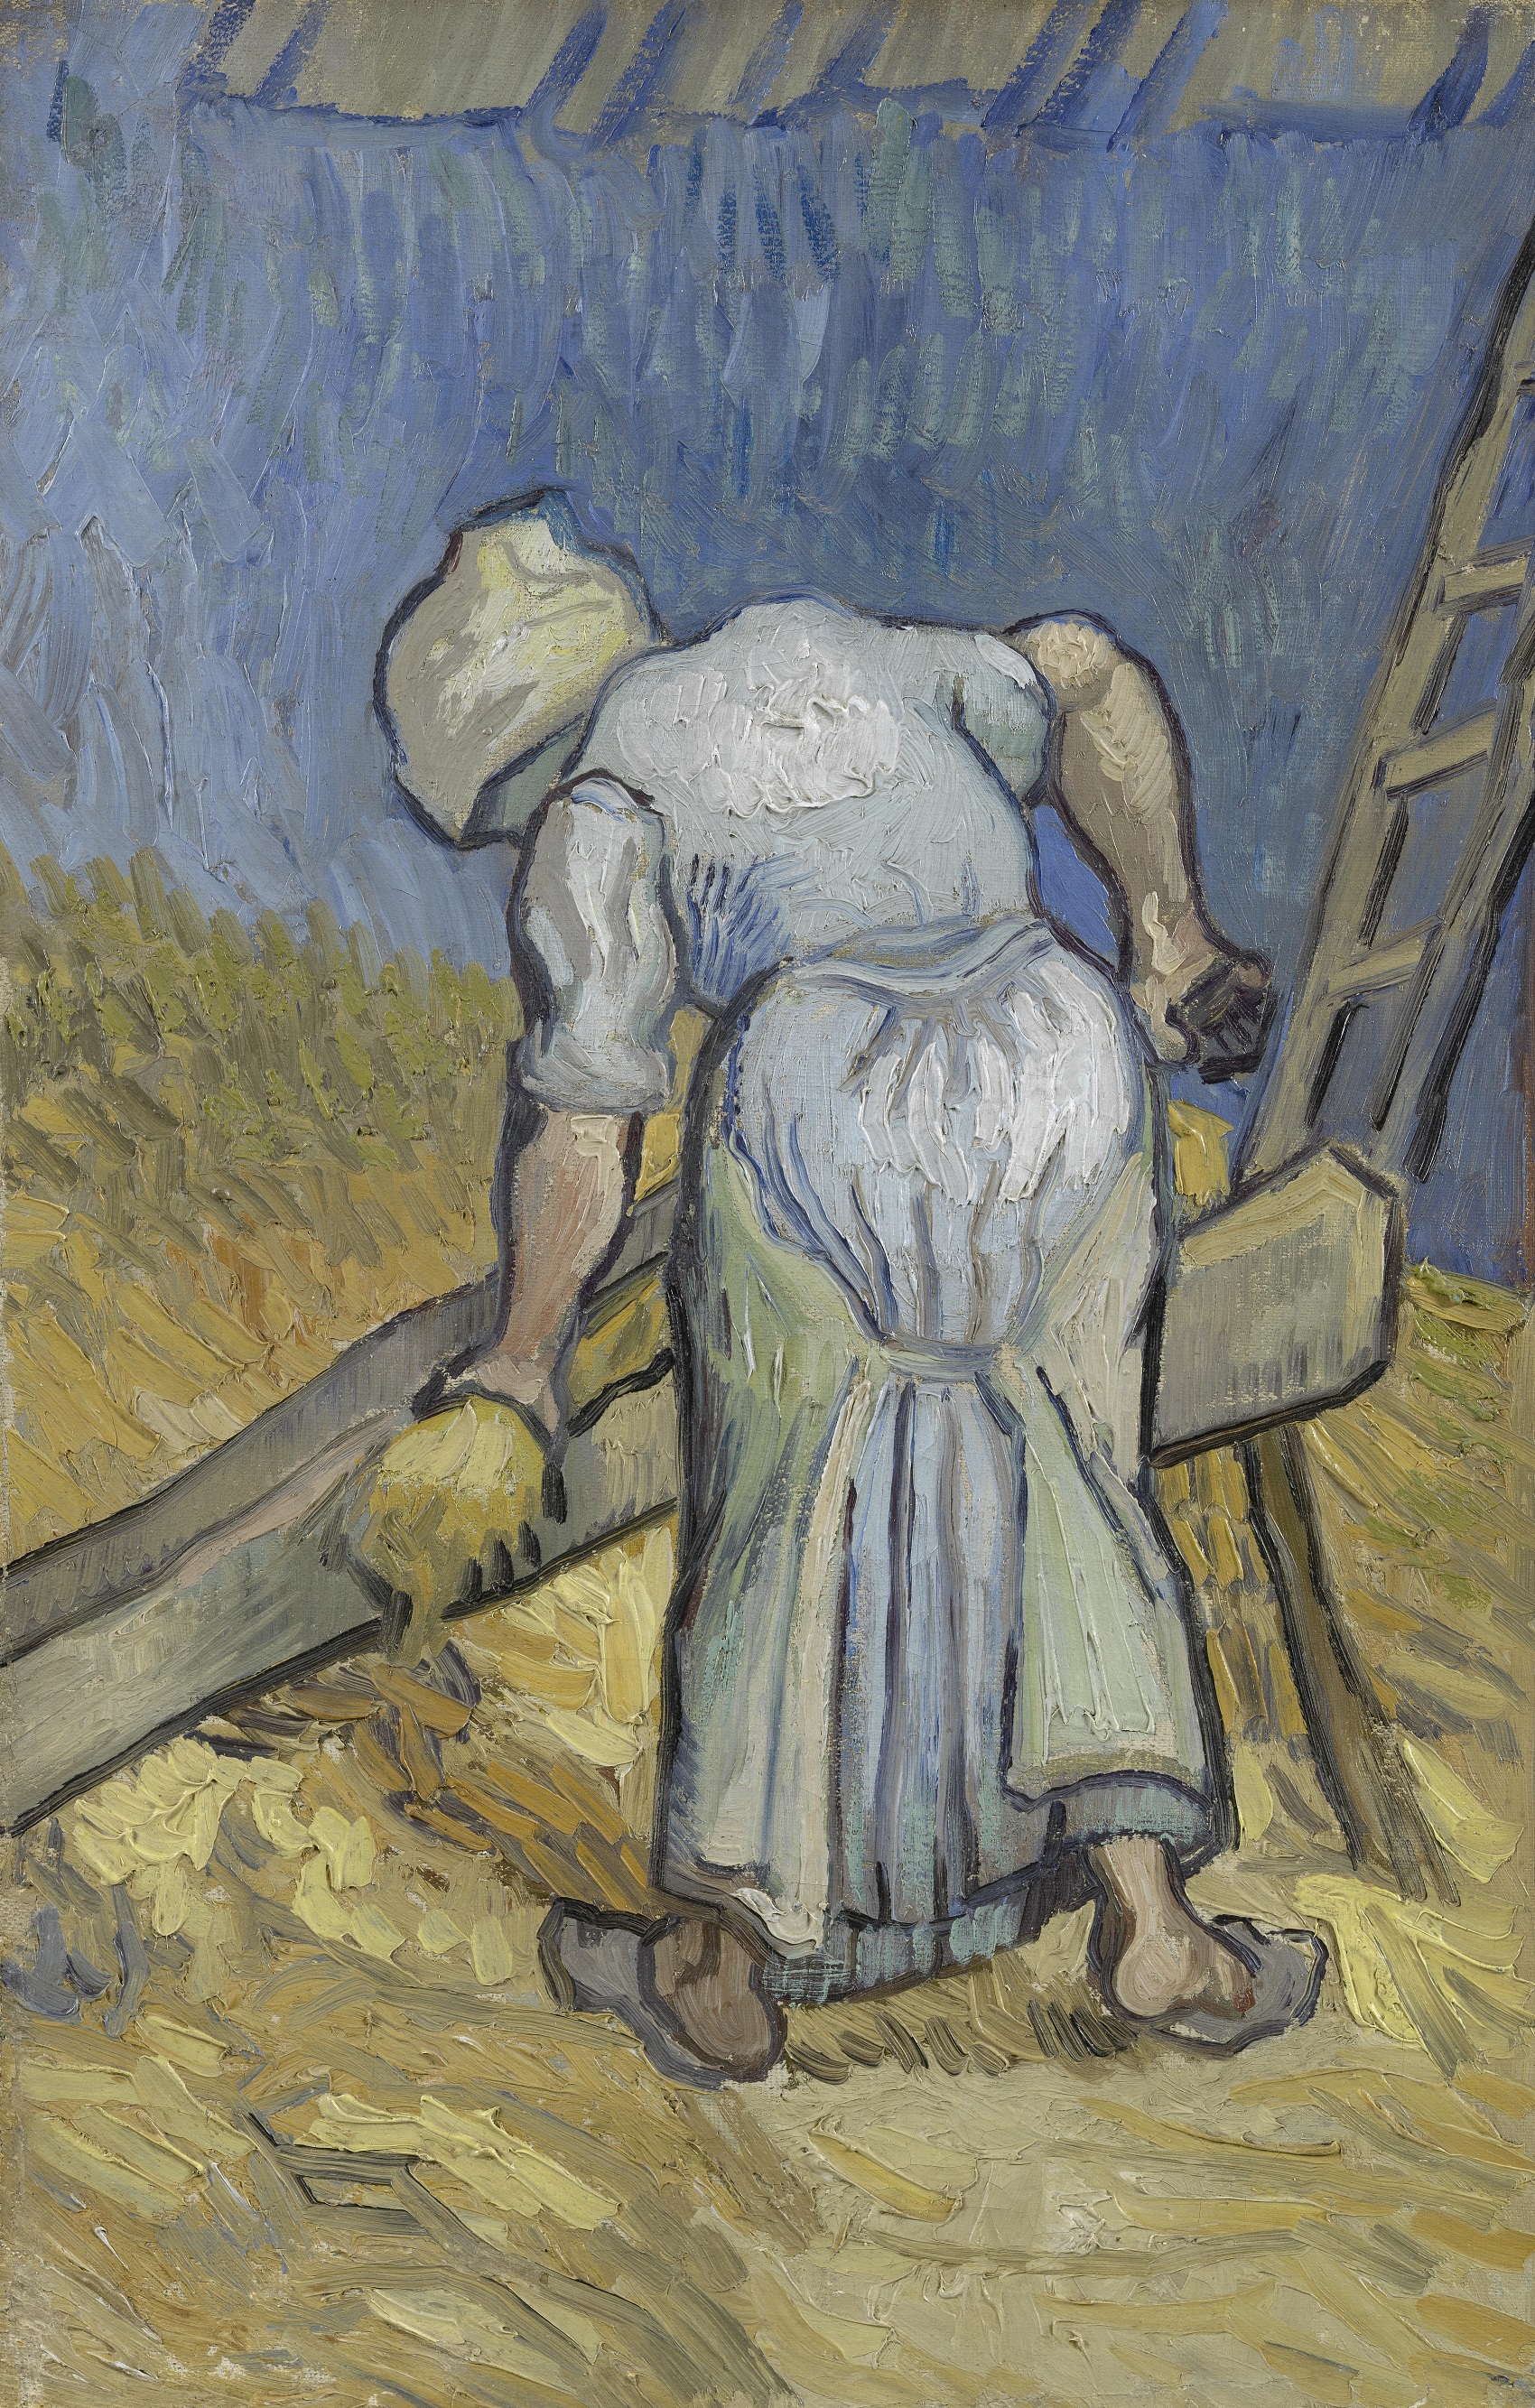 Peasant Woman Cutting Straw, after Millet 1889